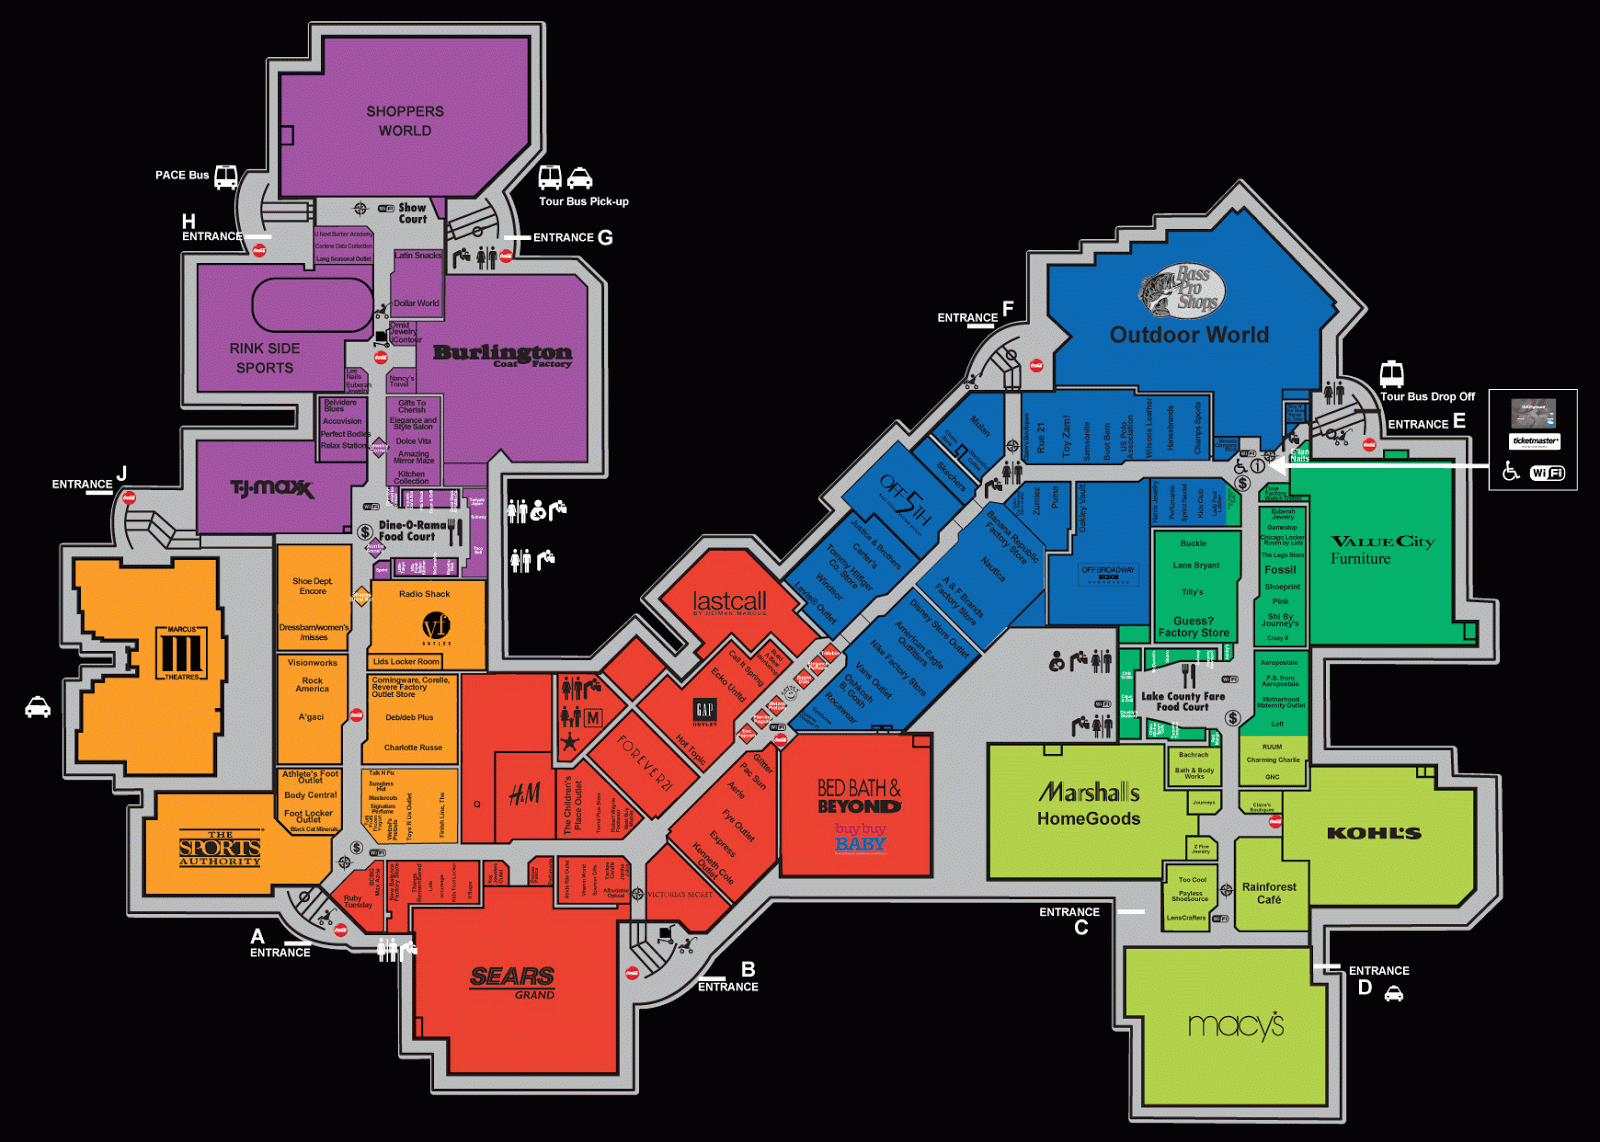 Does Katy Mills Mall have a directory map?